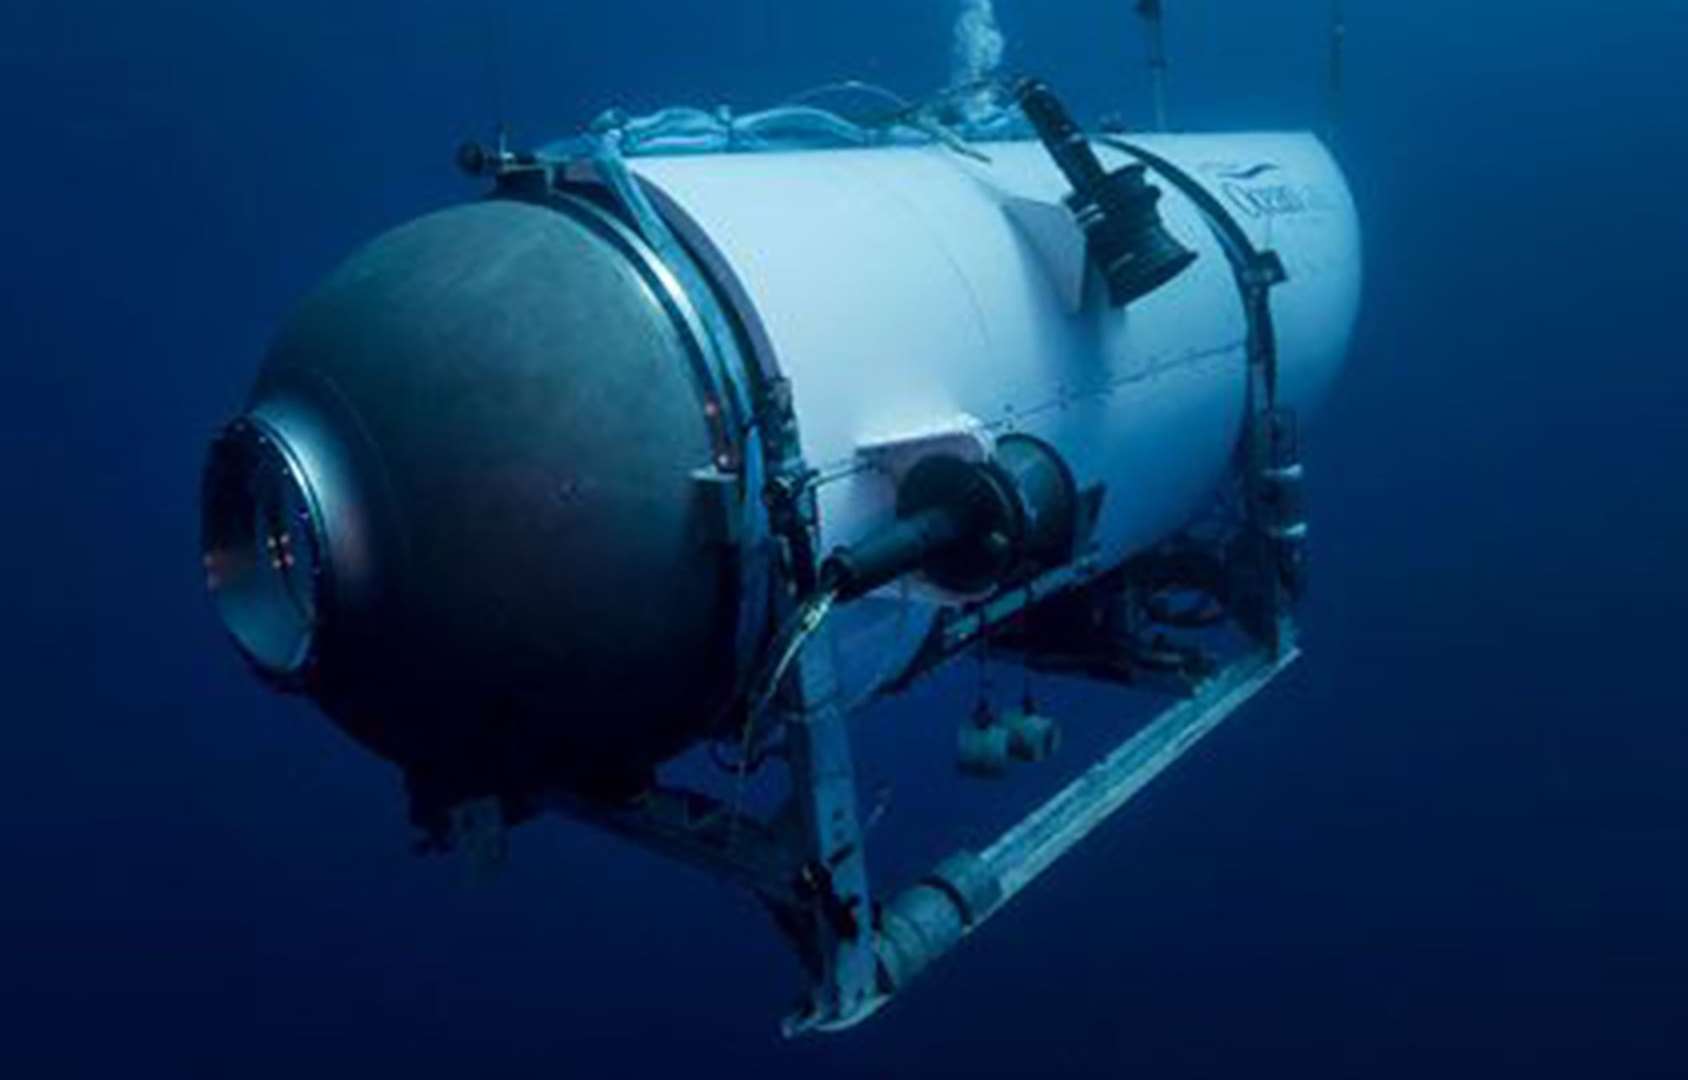 The Titan submersible weighs 20,000lb (OceanGate Expeditions/AP)